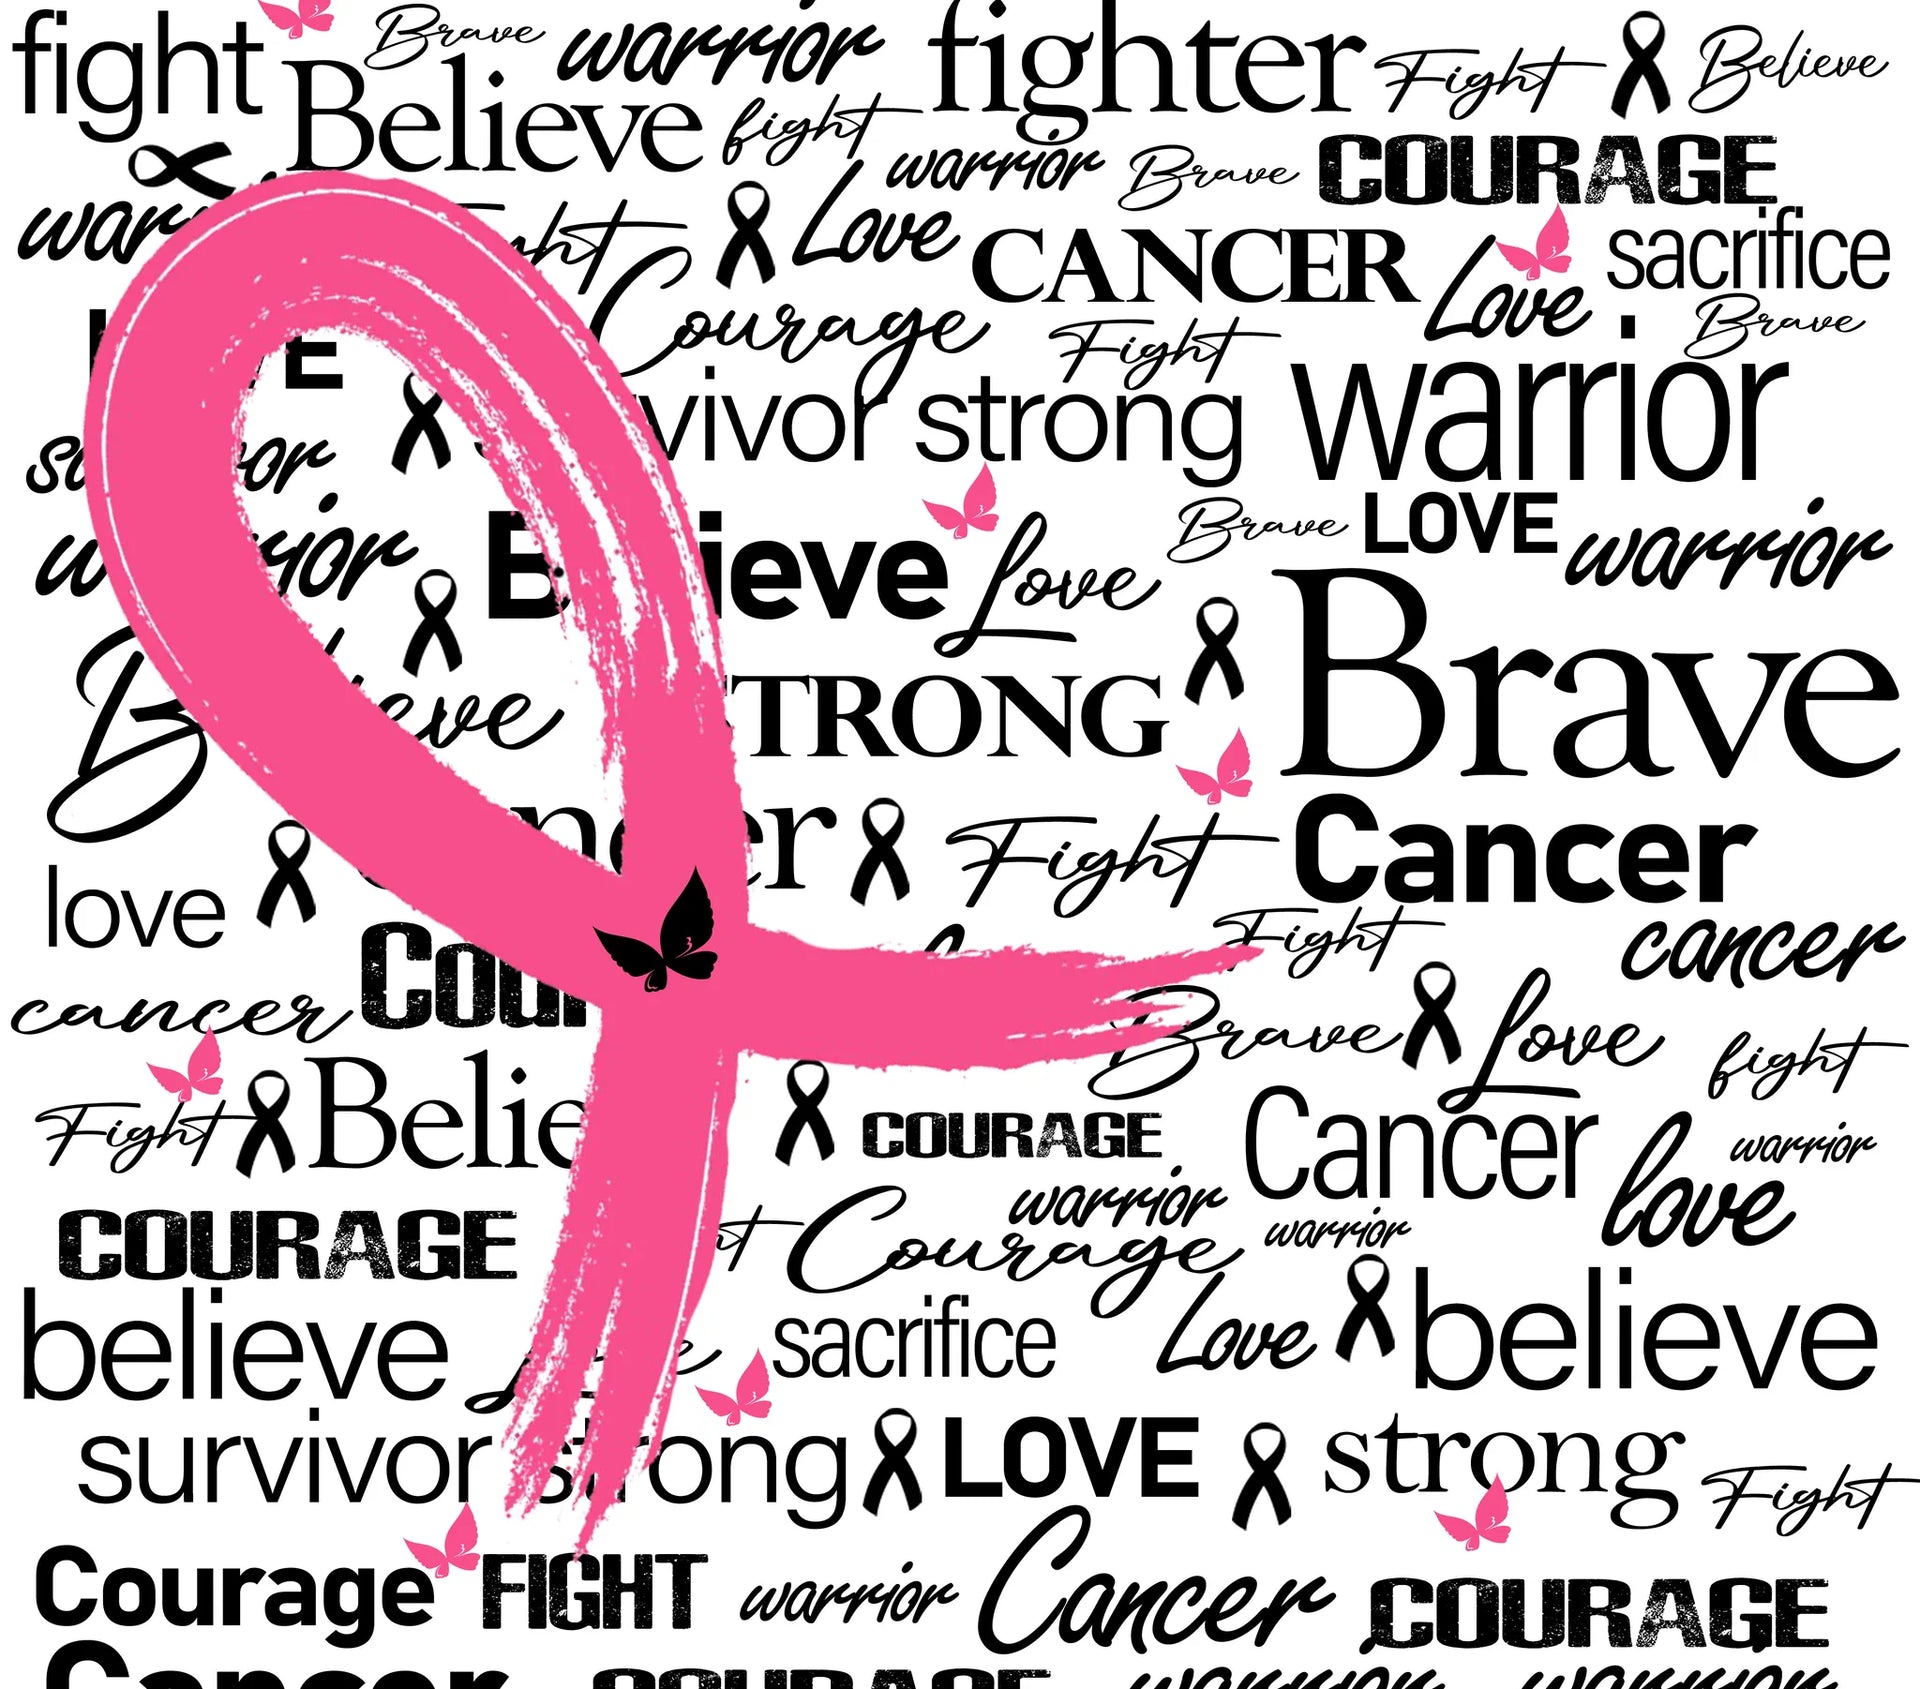 Bright Creations 250-pack Pink Breast Cancer Awareness Ribbons